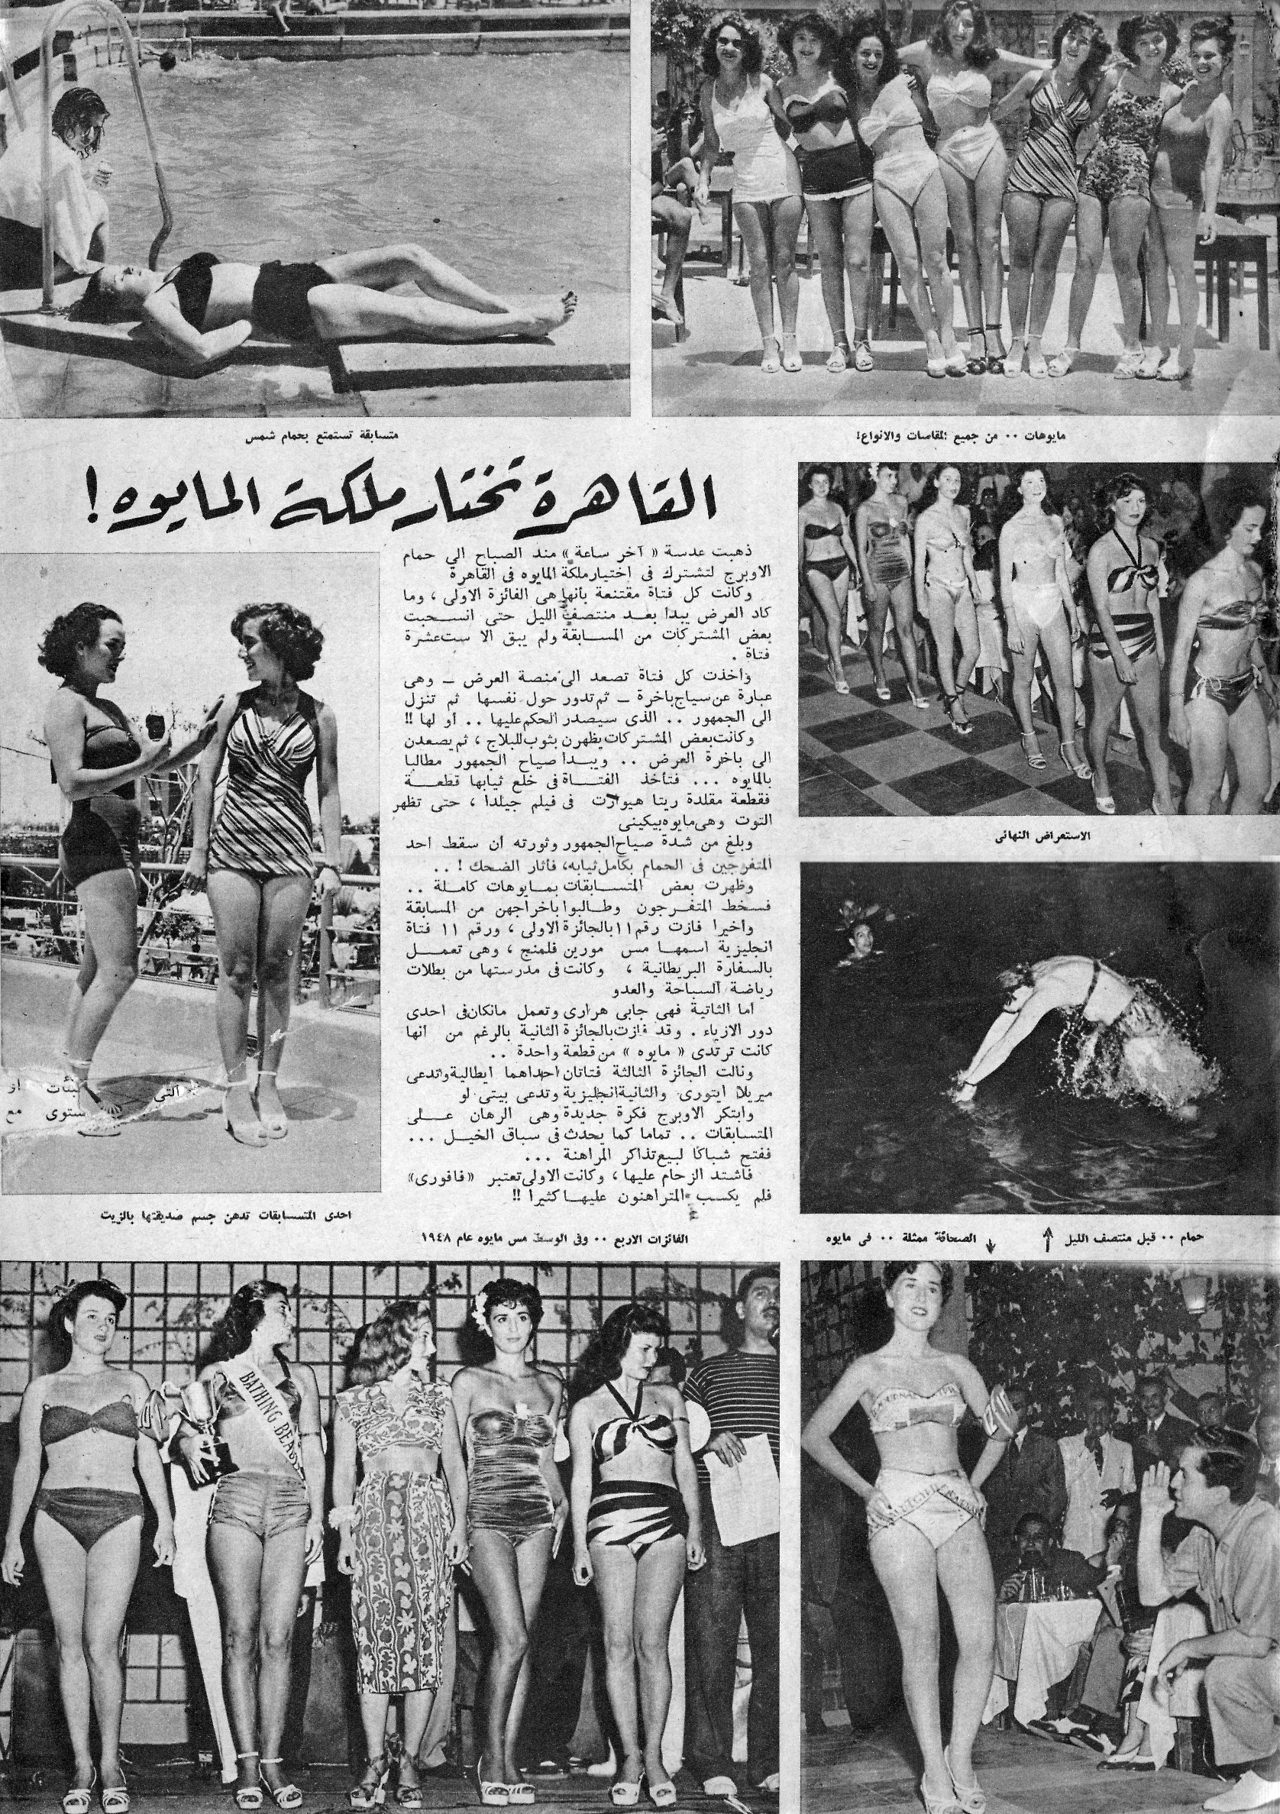 A magazine article detailing a beauty pageant in Egypt in the 1950s. Pageants and open appreciate for women's beauty was sweeping the world, and Egypt was no different. Unlike most Arab nations, Egypt has been more open to such things in the past 70 years than some of its neighbors, even with dictatorships and constant political issues.